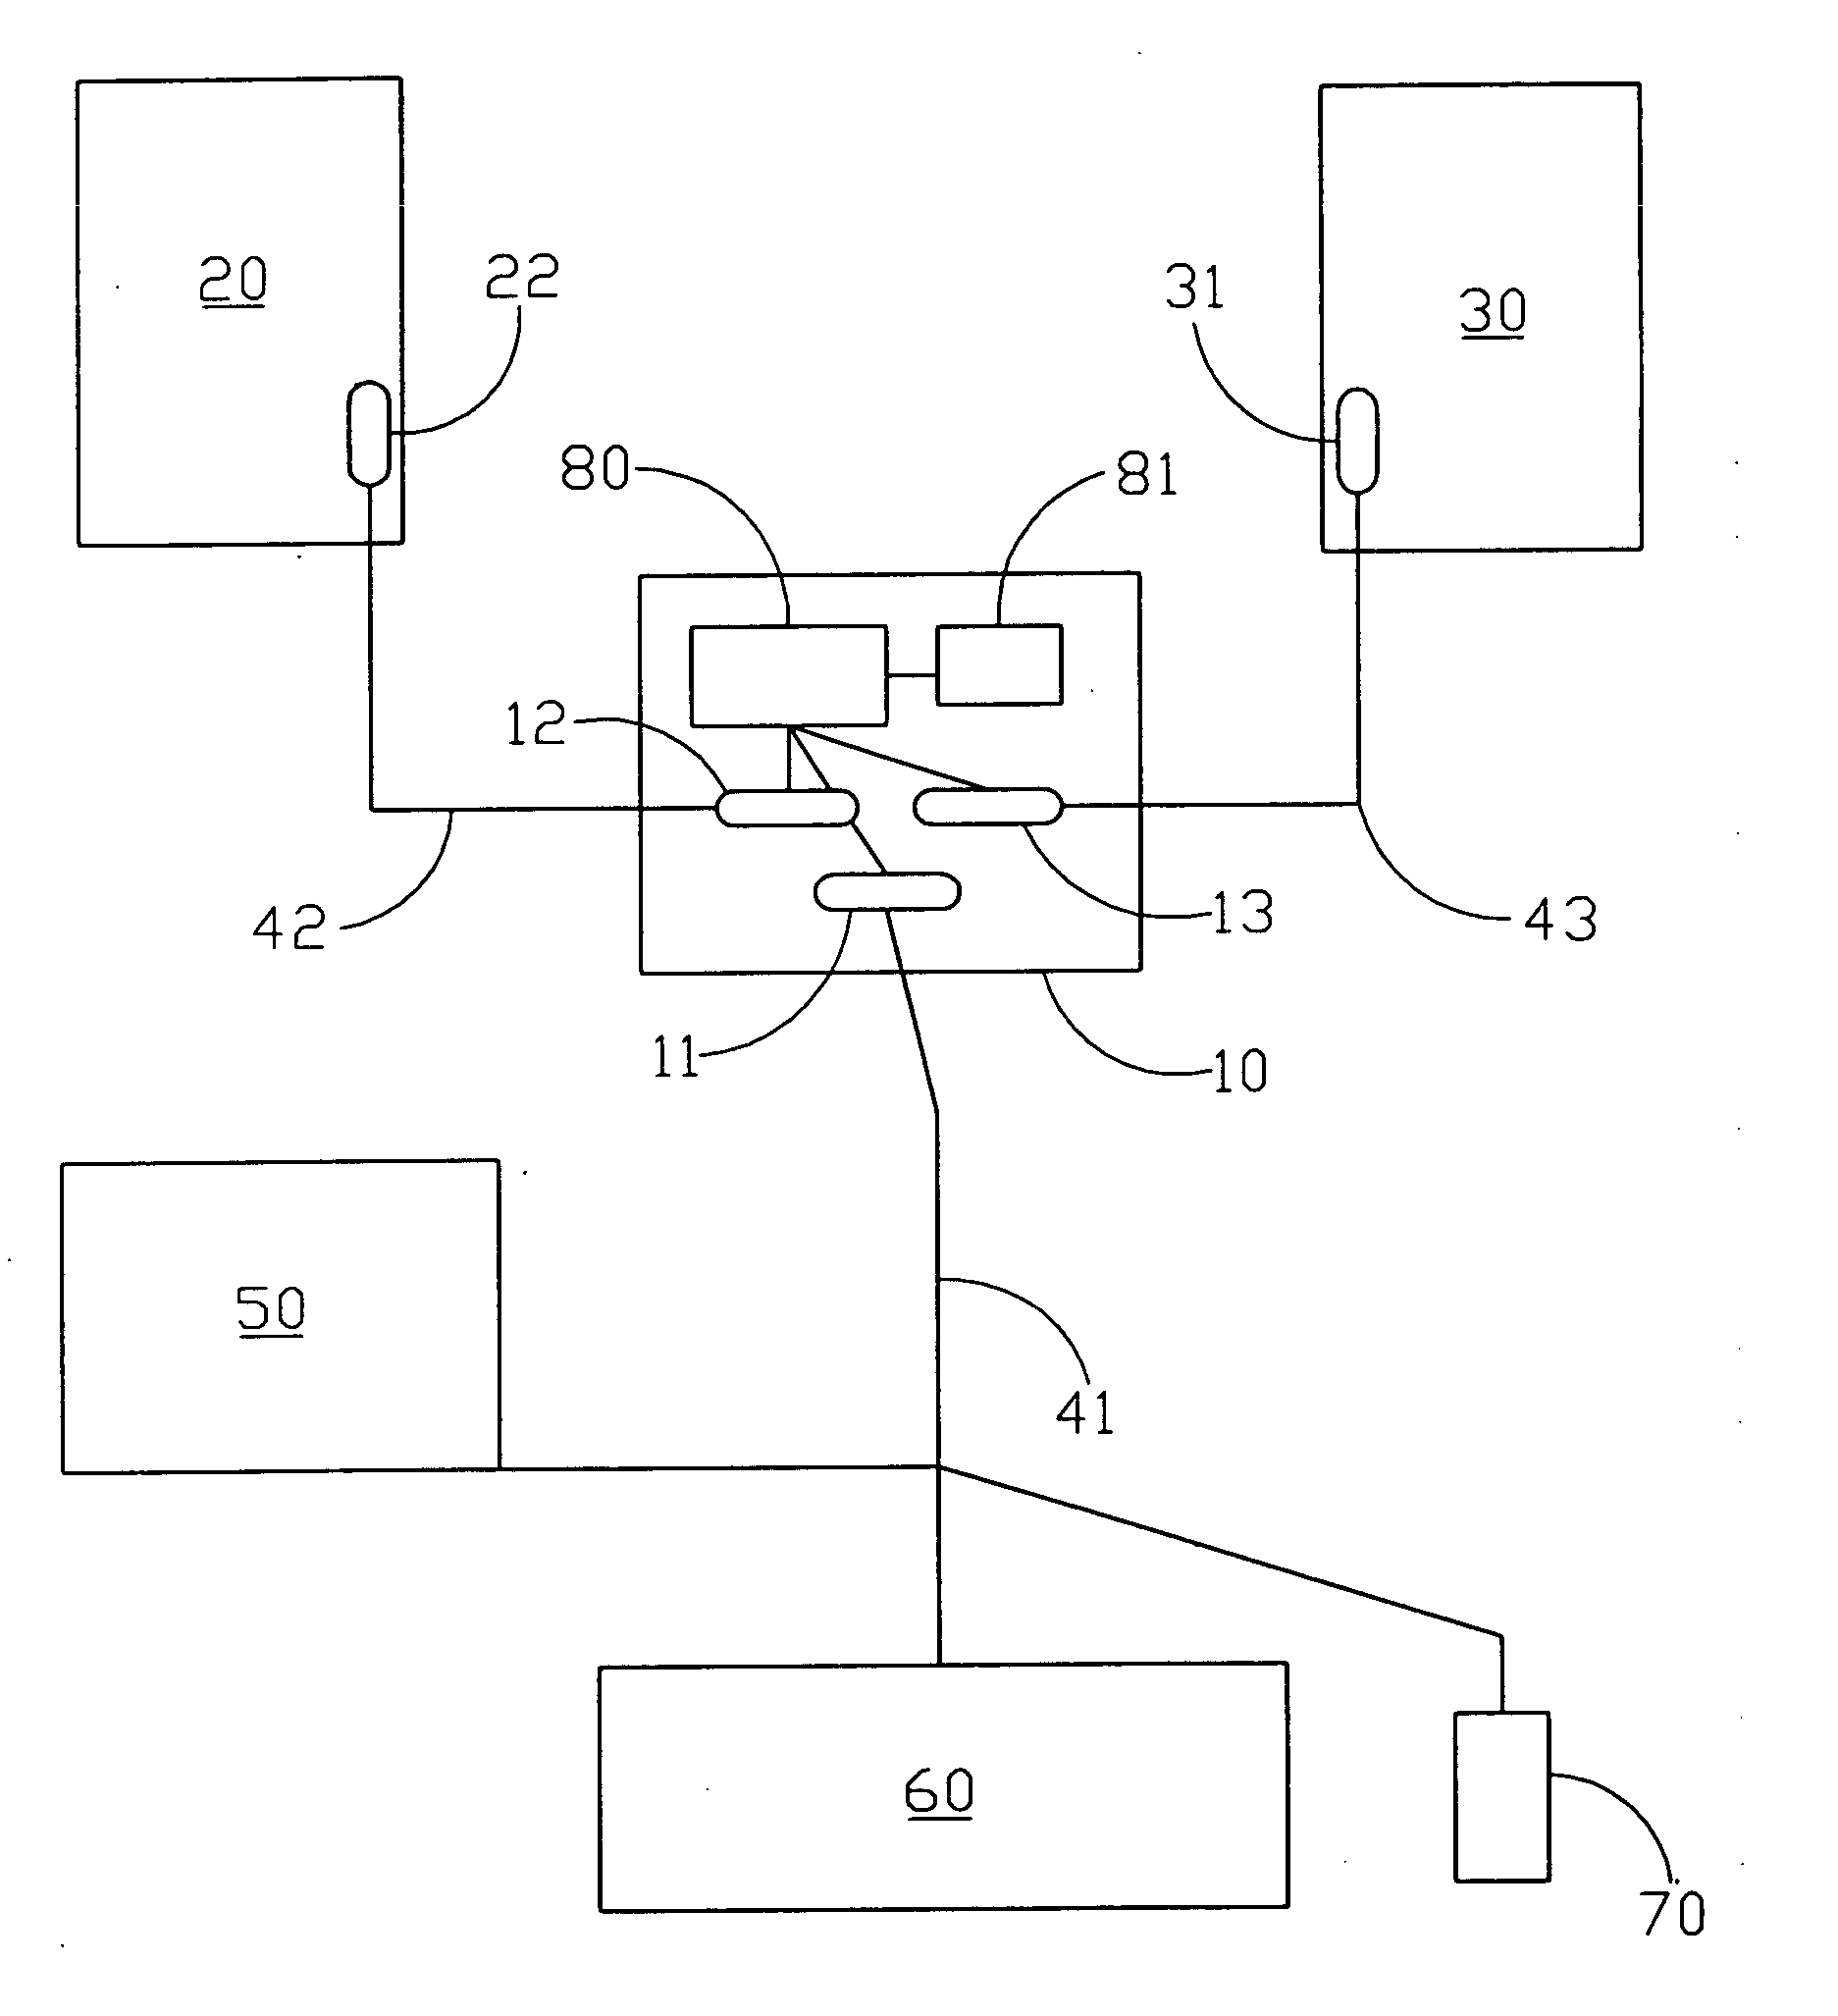 Peripheral community apparatus for computers output/input